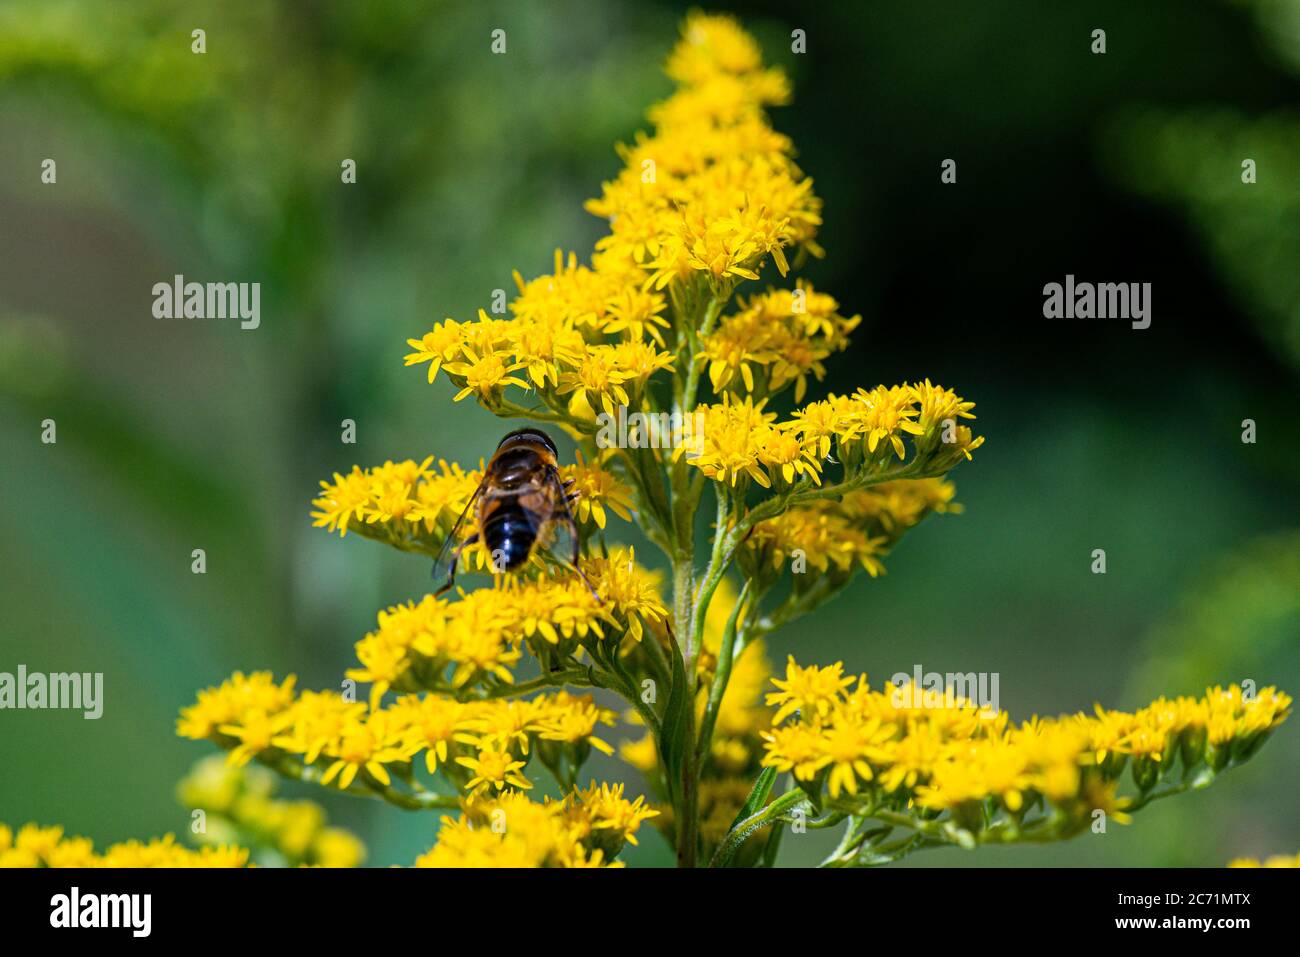 A hoverfly (Syrphidae) on the flowers of a goldenrod (Solidago) Stock Photo